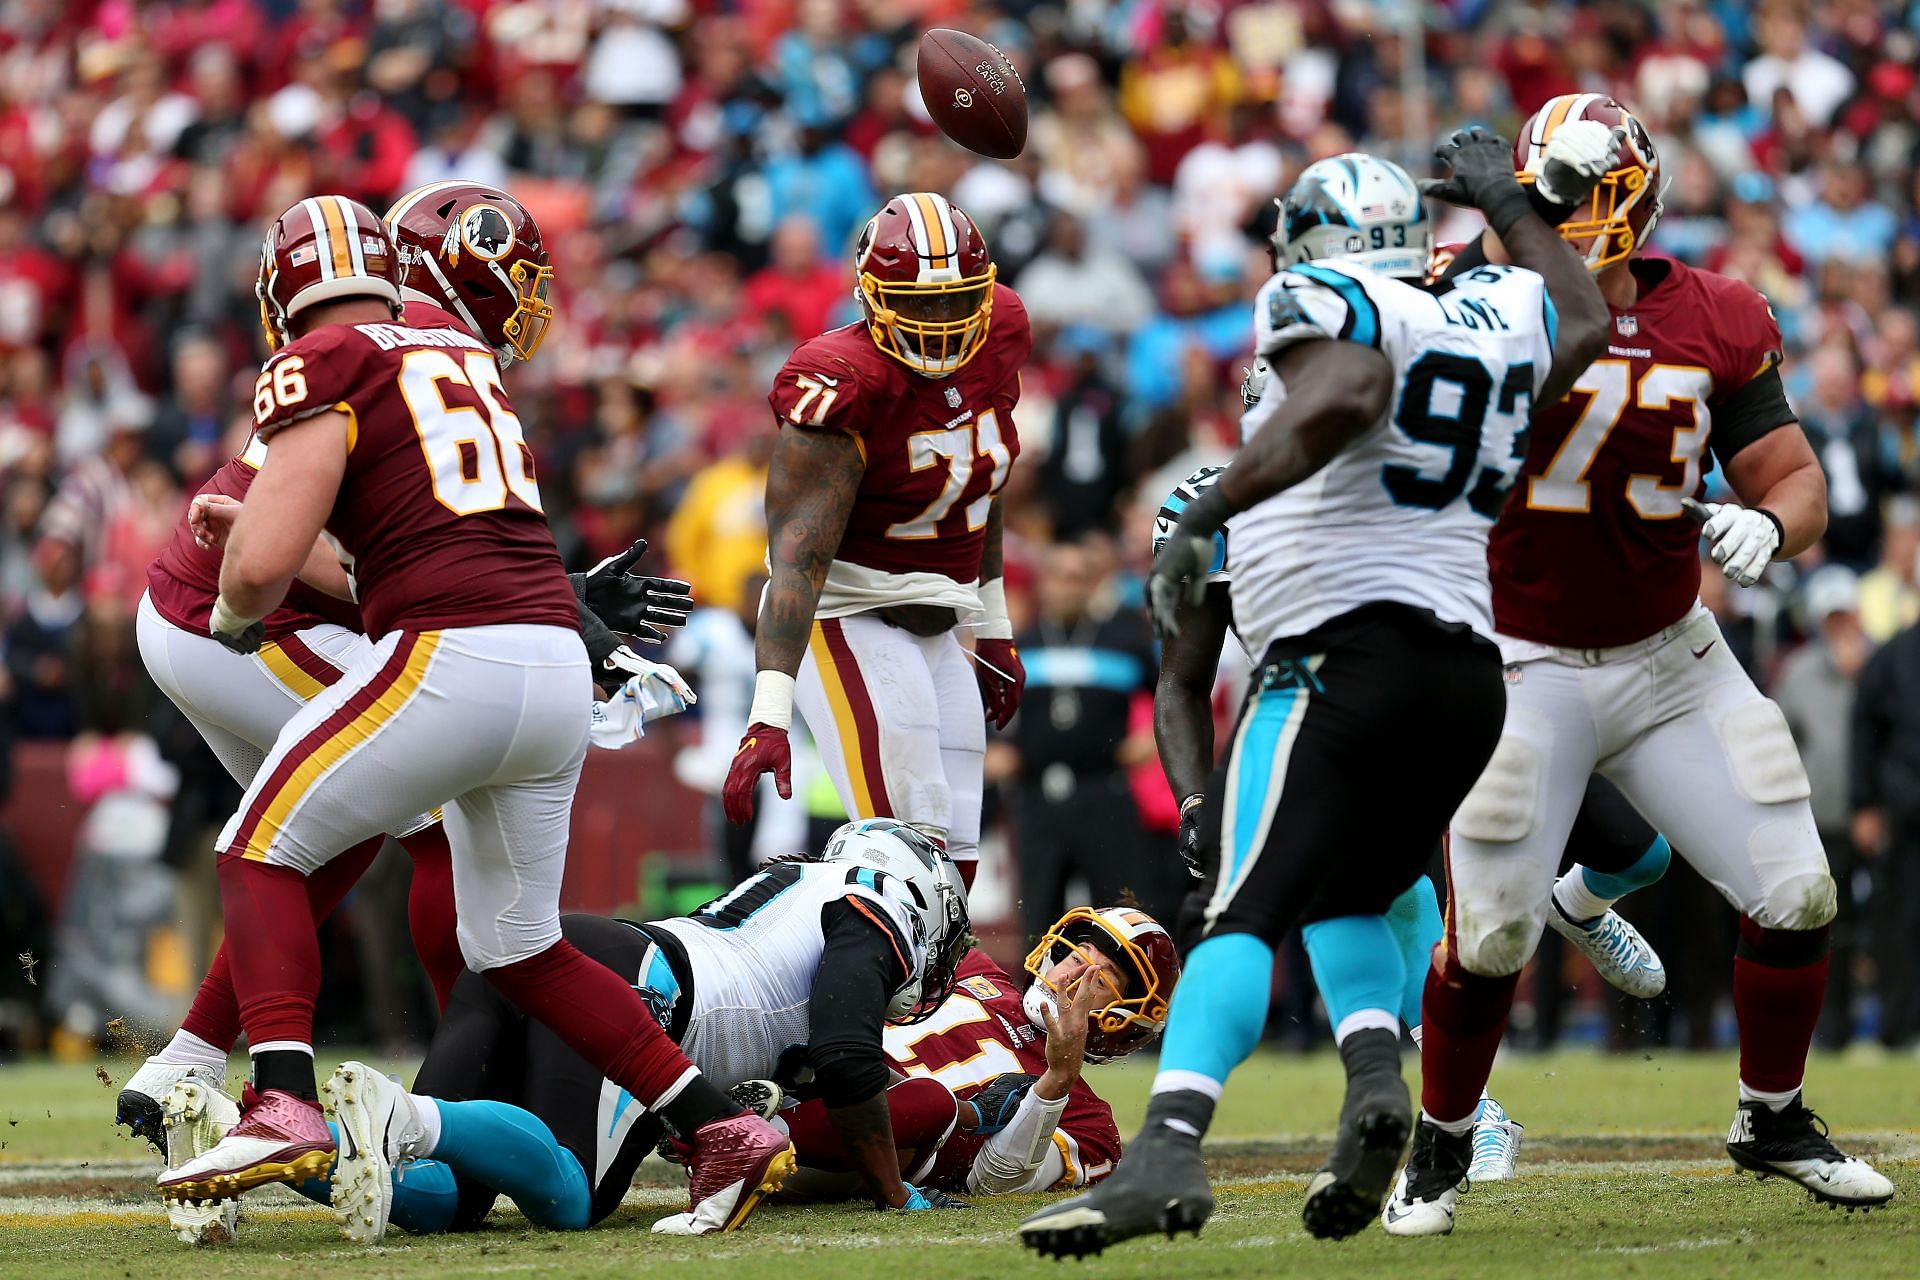 Alex Smith #11 of the Washington Redskins fumbles the ball after being hit by Julius Peppers